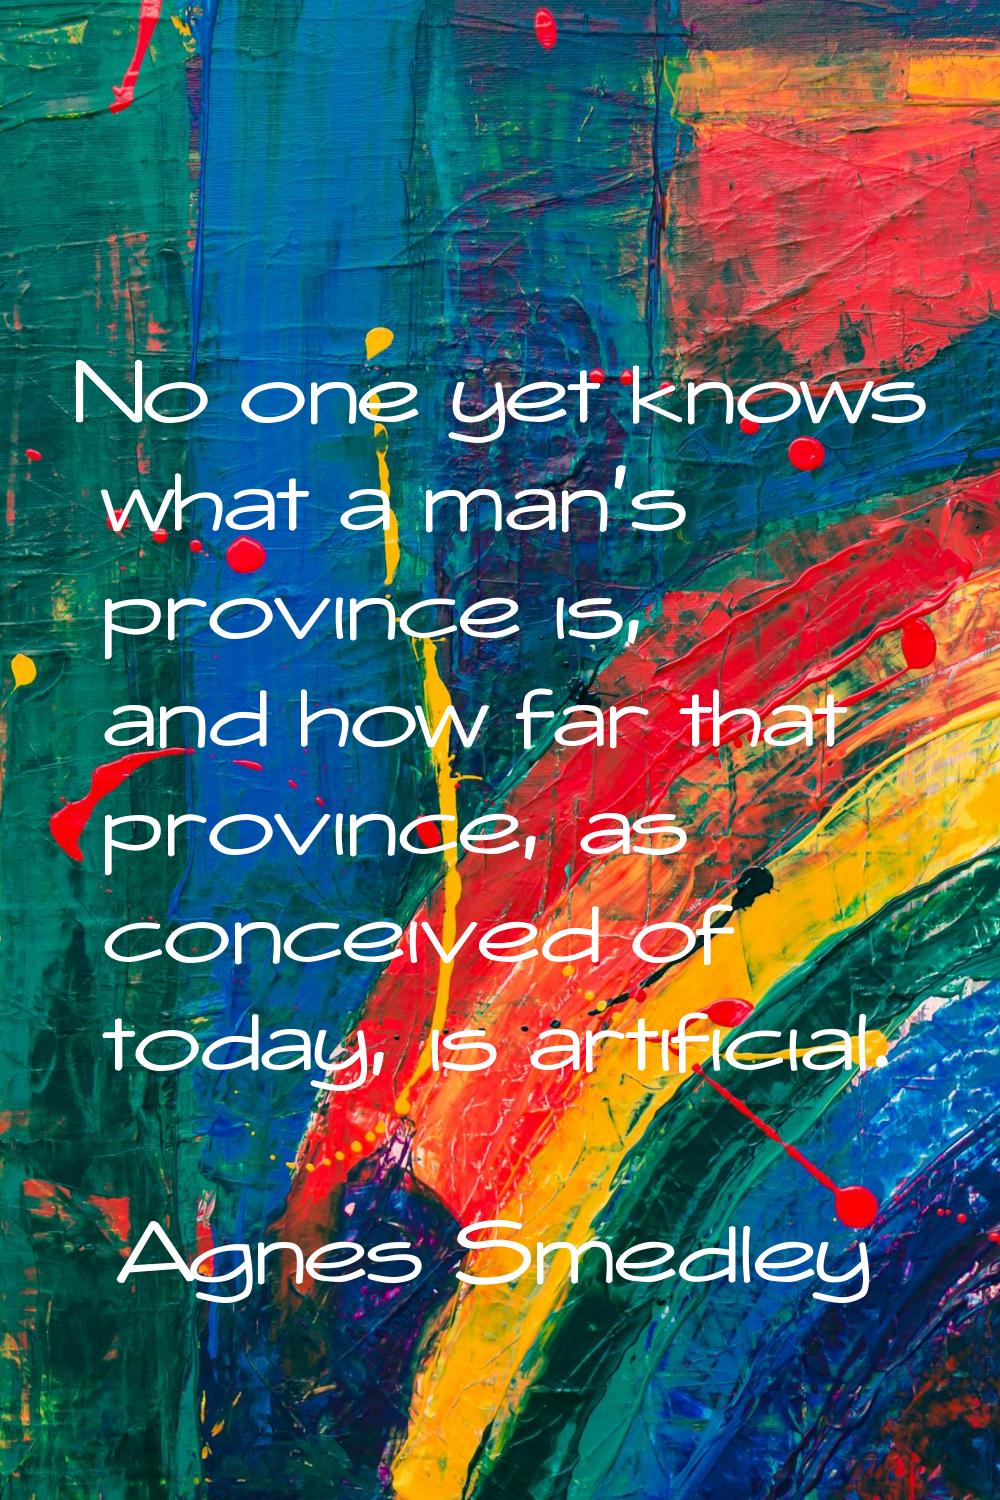 No one yet knows what a man's province is, and how far that province, as conceived of today, is art